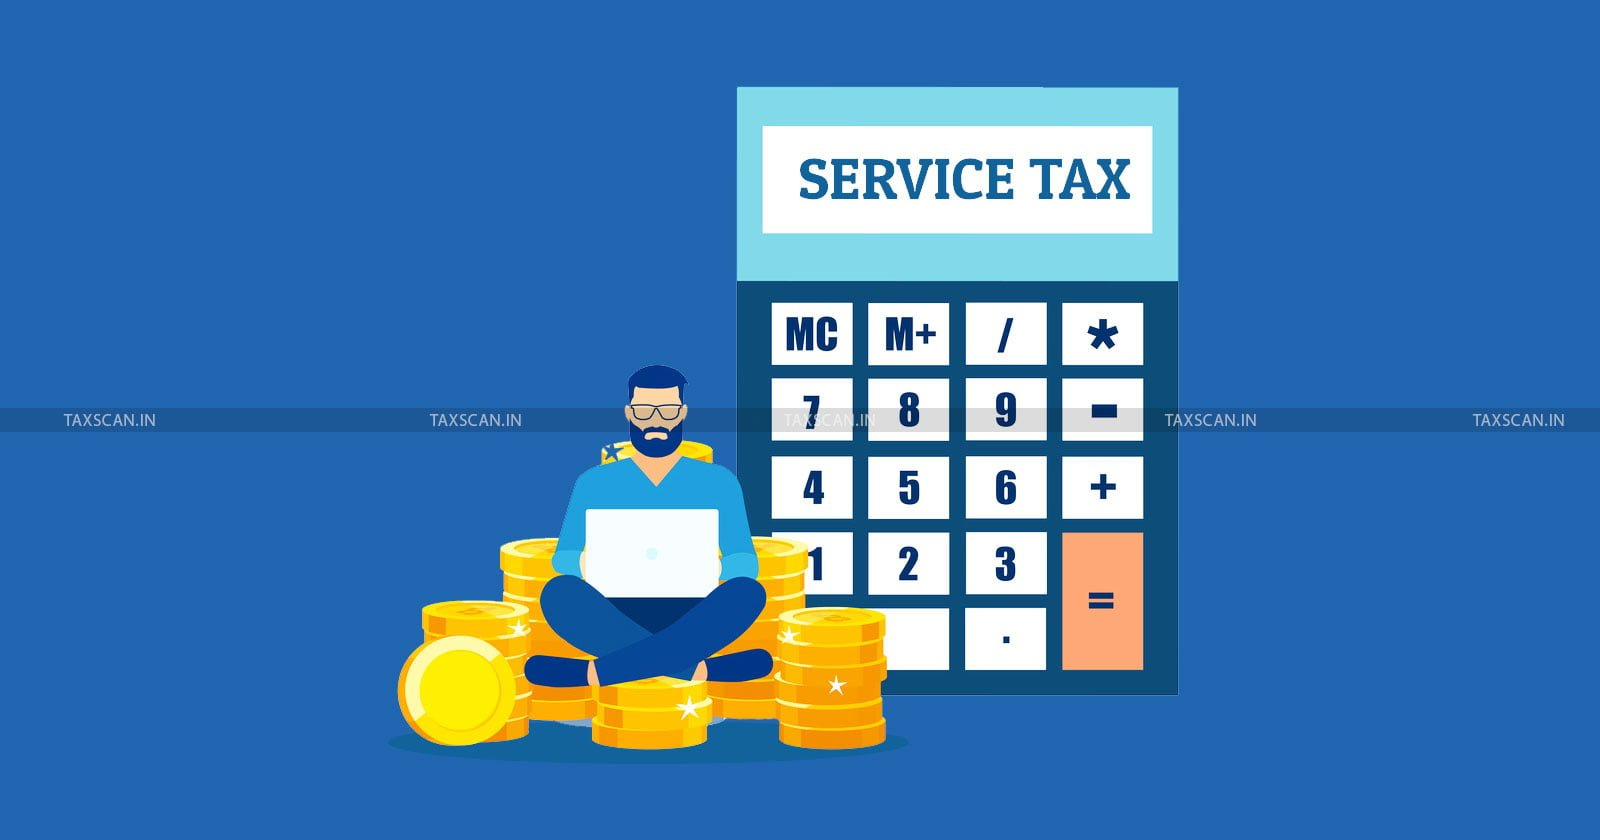 Relief to Mahindra World City - CESTAT quashes service tax demand - Mahindra World City -service tax demand - service - rate of tax - taxscan